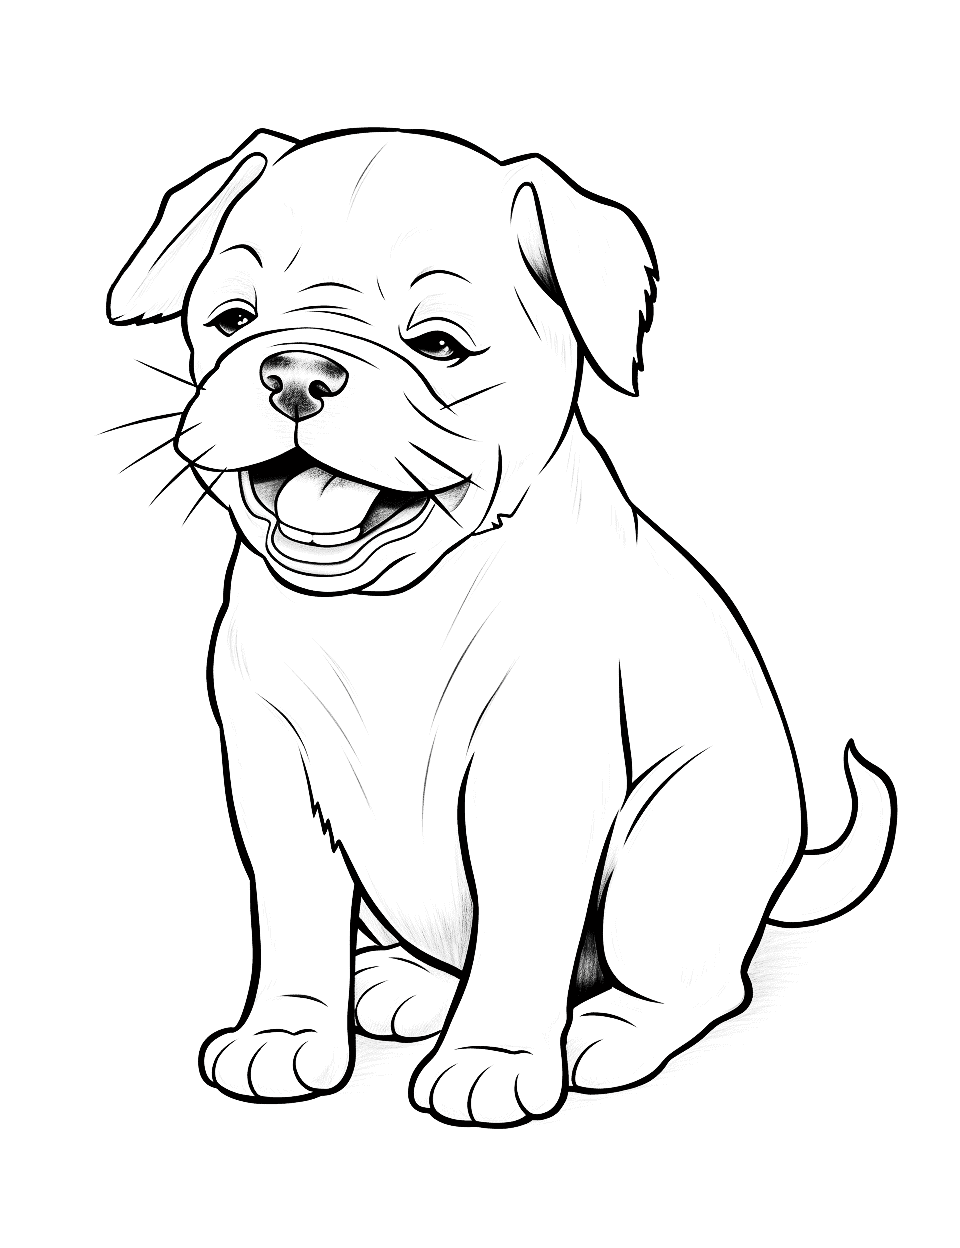 Adorable Yawn Sleepy Bulldog Puppy Coloring Page - A Bulldog puppy caught mid-yawn, ready for bedtime.